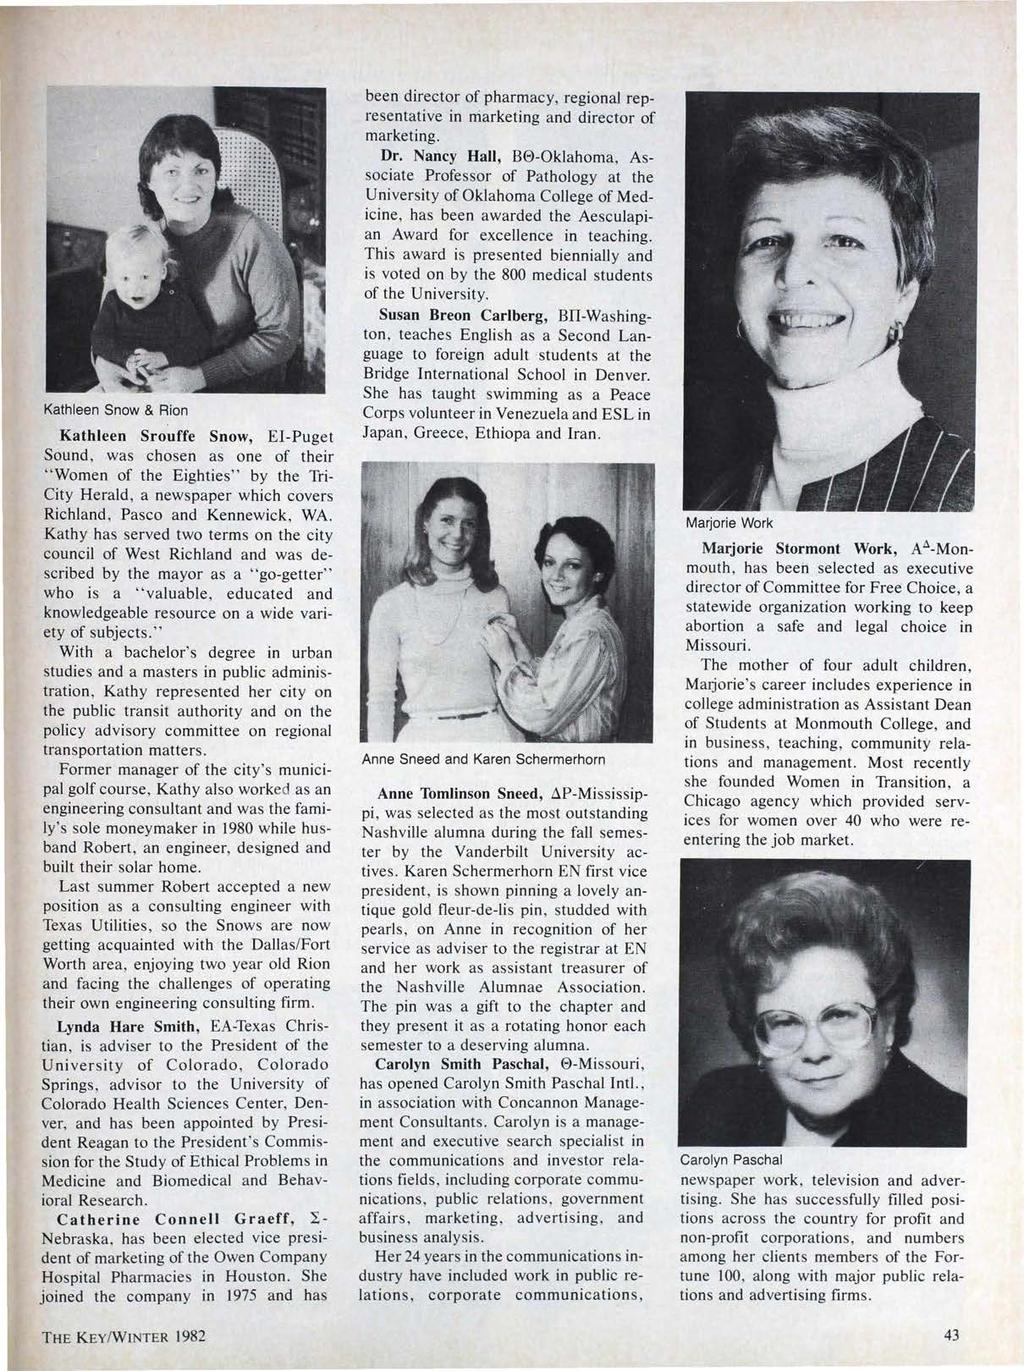 Kathleen Snow & Rion Kathleen Srouffe Snow, EI-Puget Sound, was chosen as one of their "Women of the Eighties" by the Tri City Herald, a newspaper which covers Richland, Pasco and Kennewick, WA.